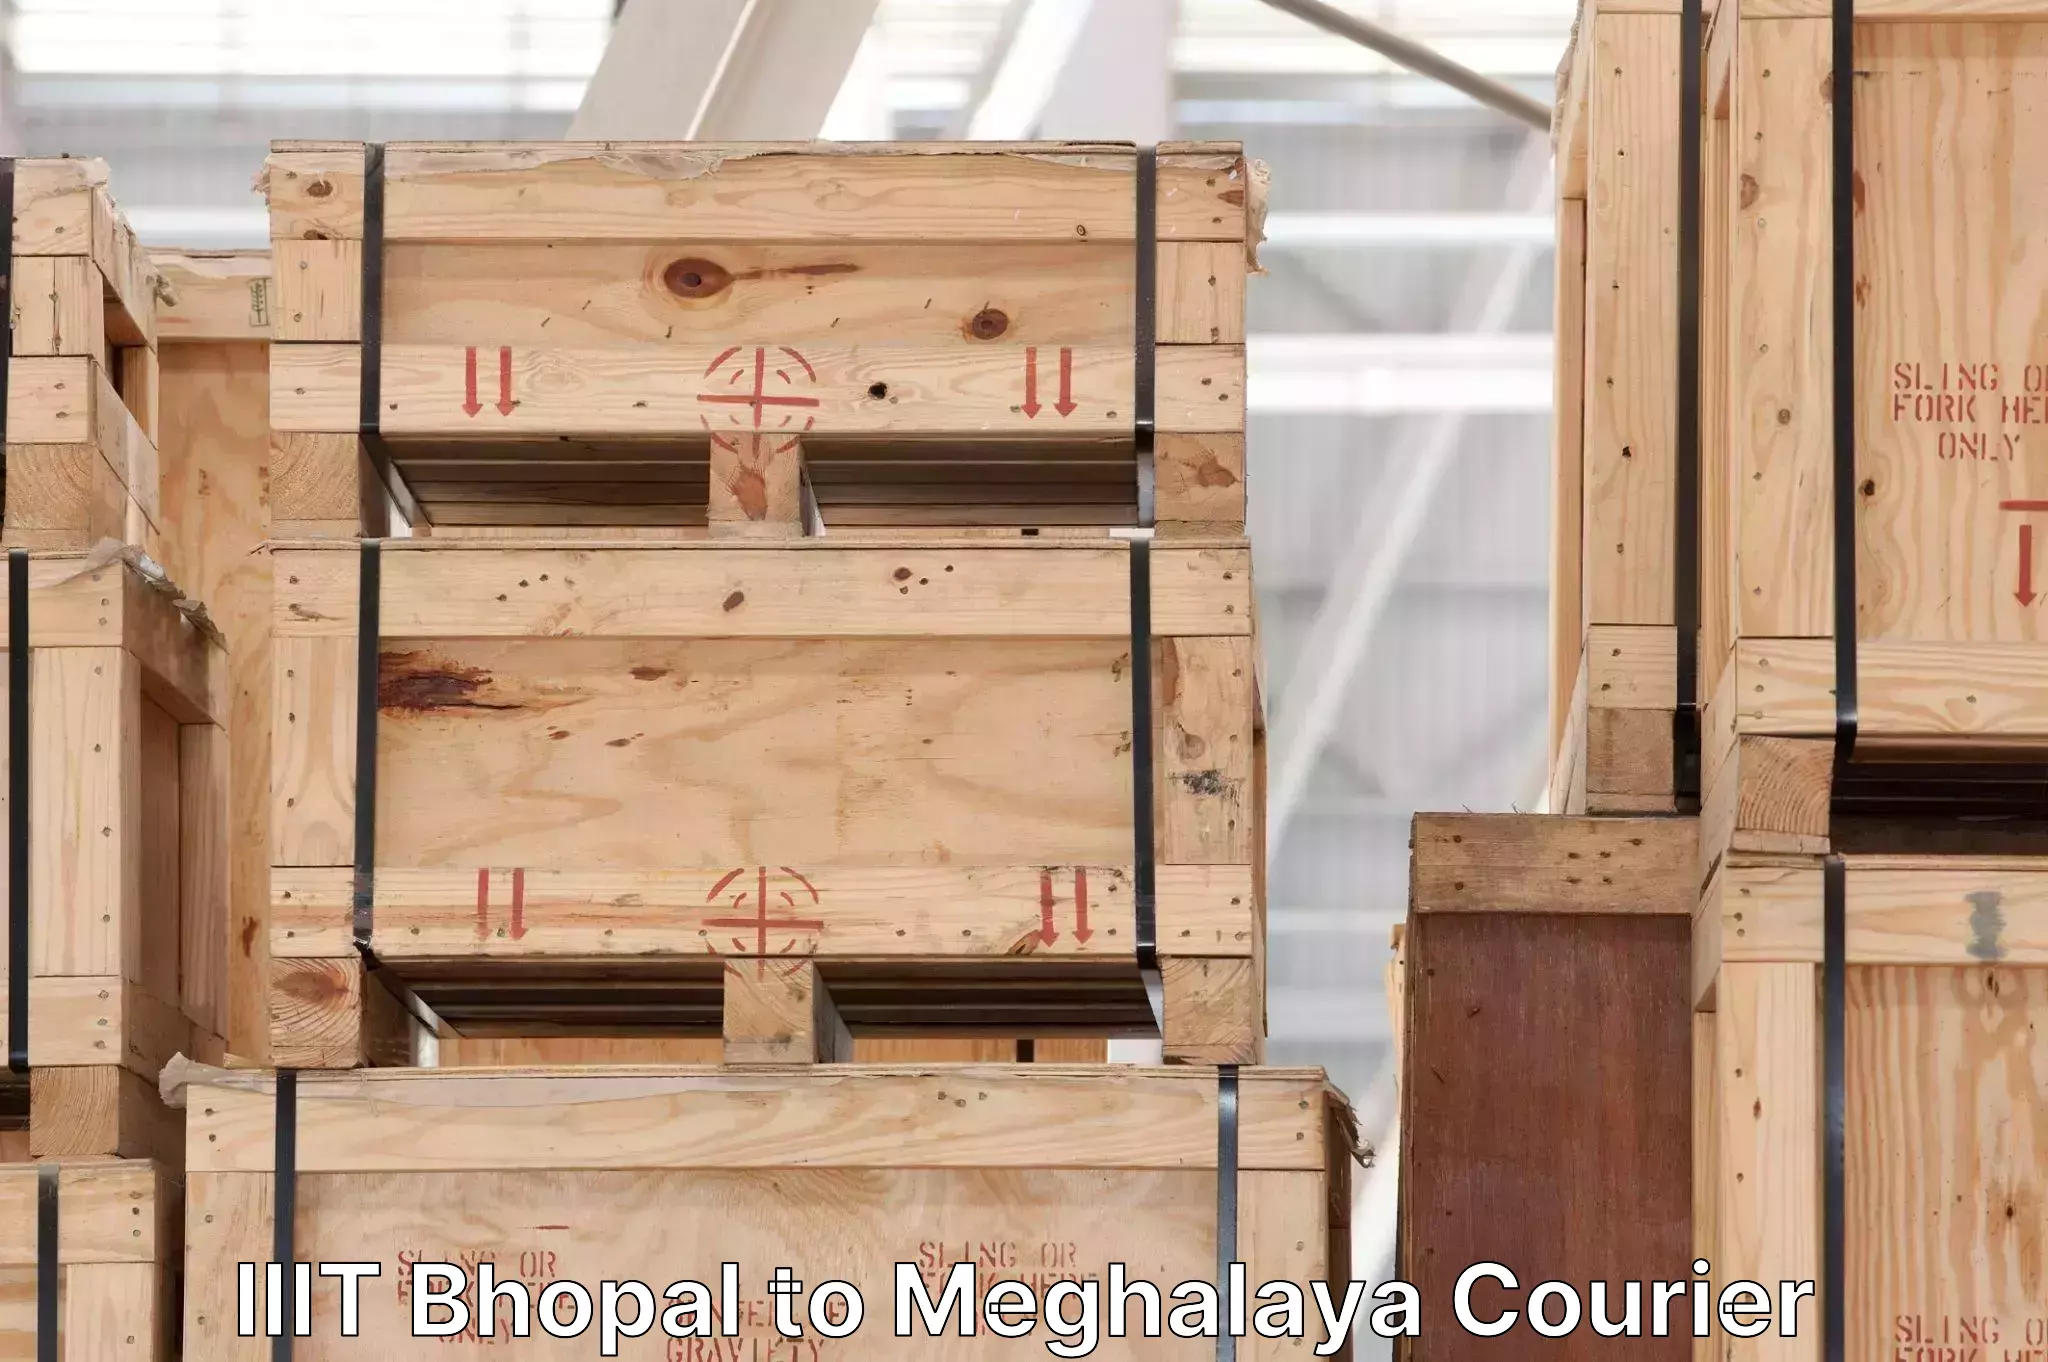 Medical delivery services IIIT Bhopal to Meghalaya